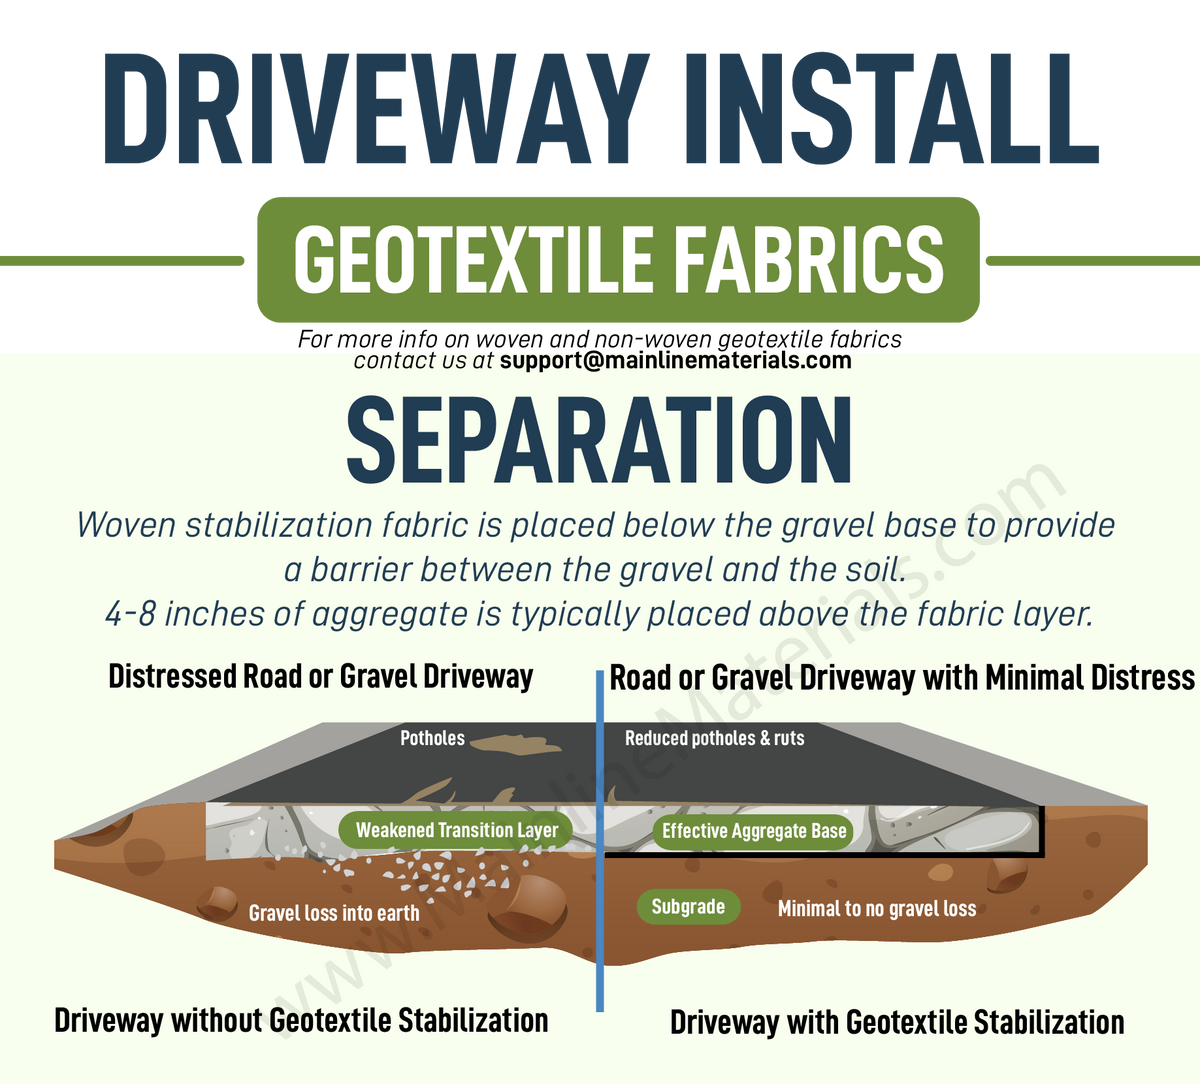 Geotextile Infographic for driveway fabric